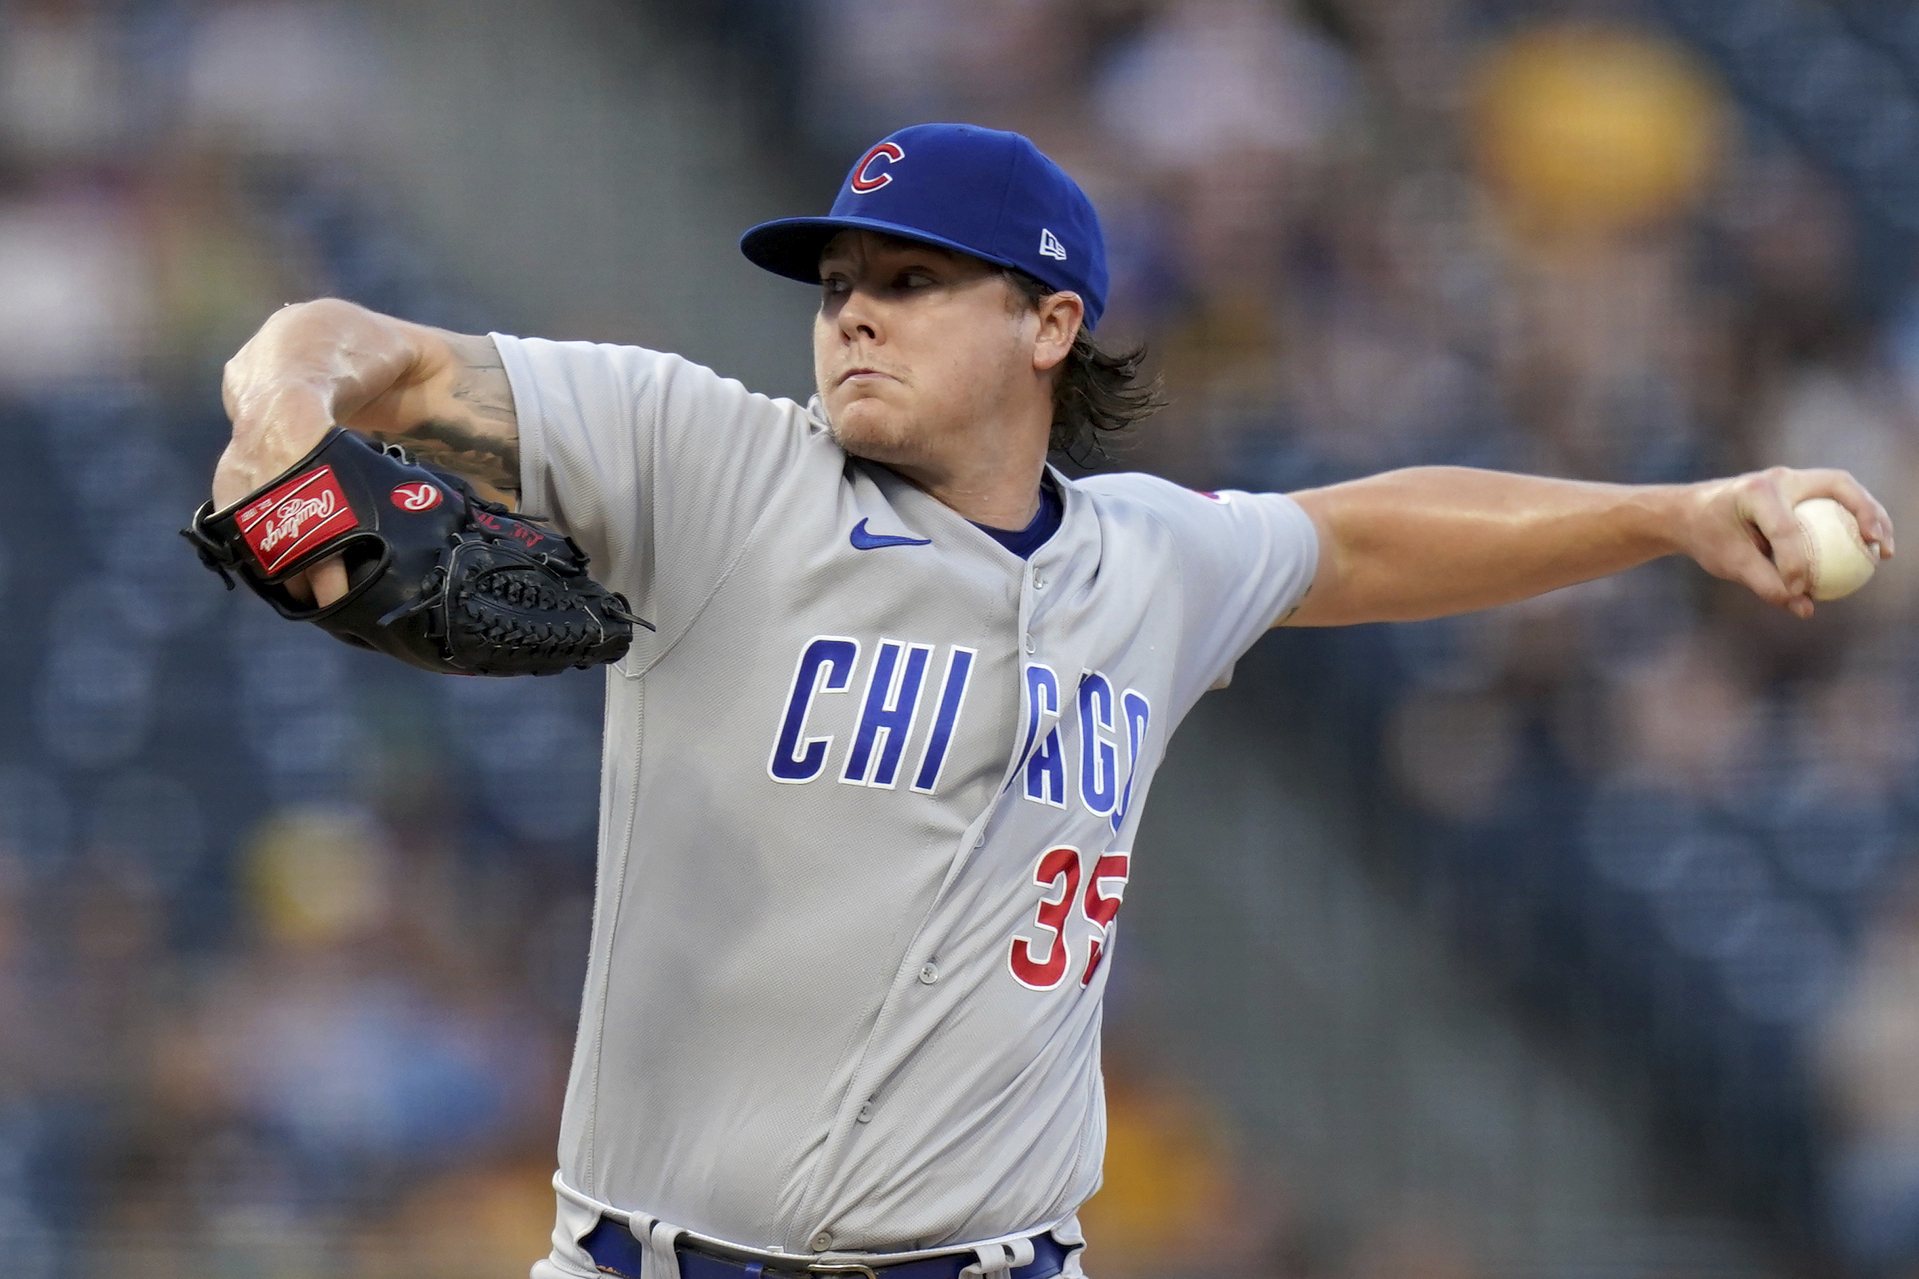 Chicago Cubs: See what adjustments the team has made to their